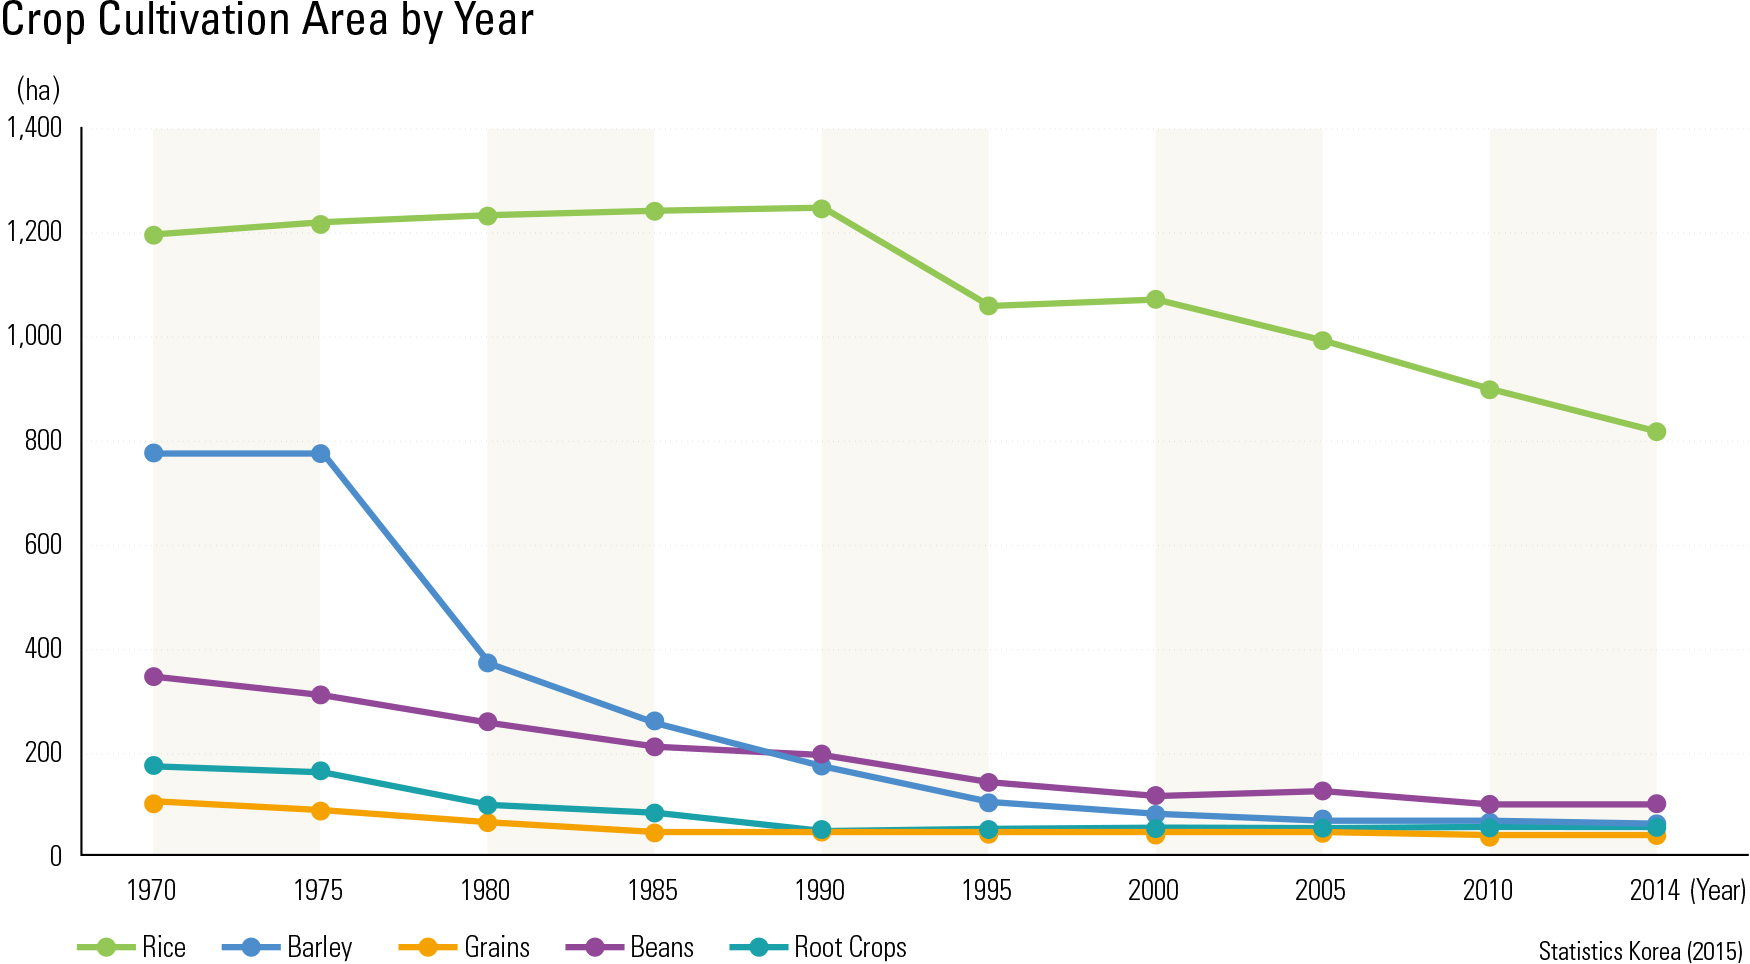 Crop Cultivation Area by Year<p class="oz_zoom" zimg="http://imagedata.cafe24.com/us_2/us2_66-3_2.jpg"><span style="font-family:Nanum Myeongjo;"><span style="font-size:18px;"><span class="label label-danger">UPDATE DATA</span></span></p>